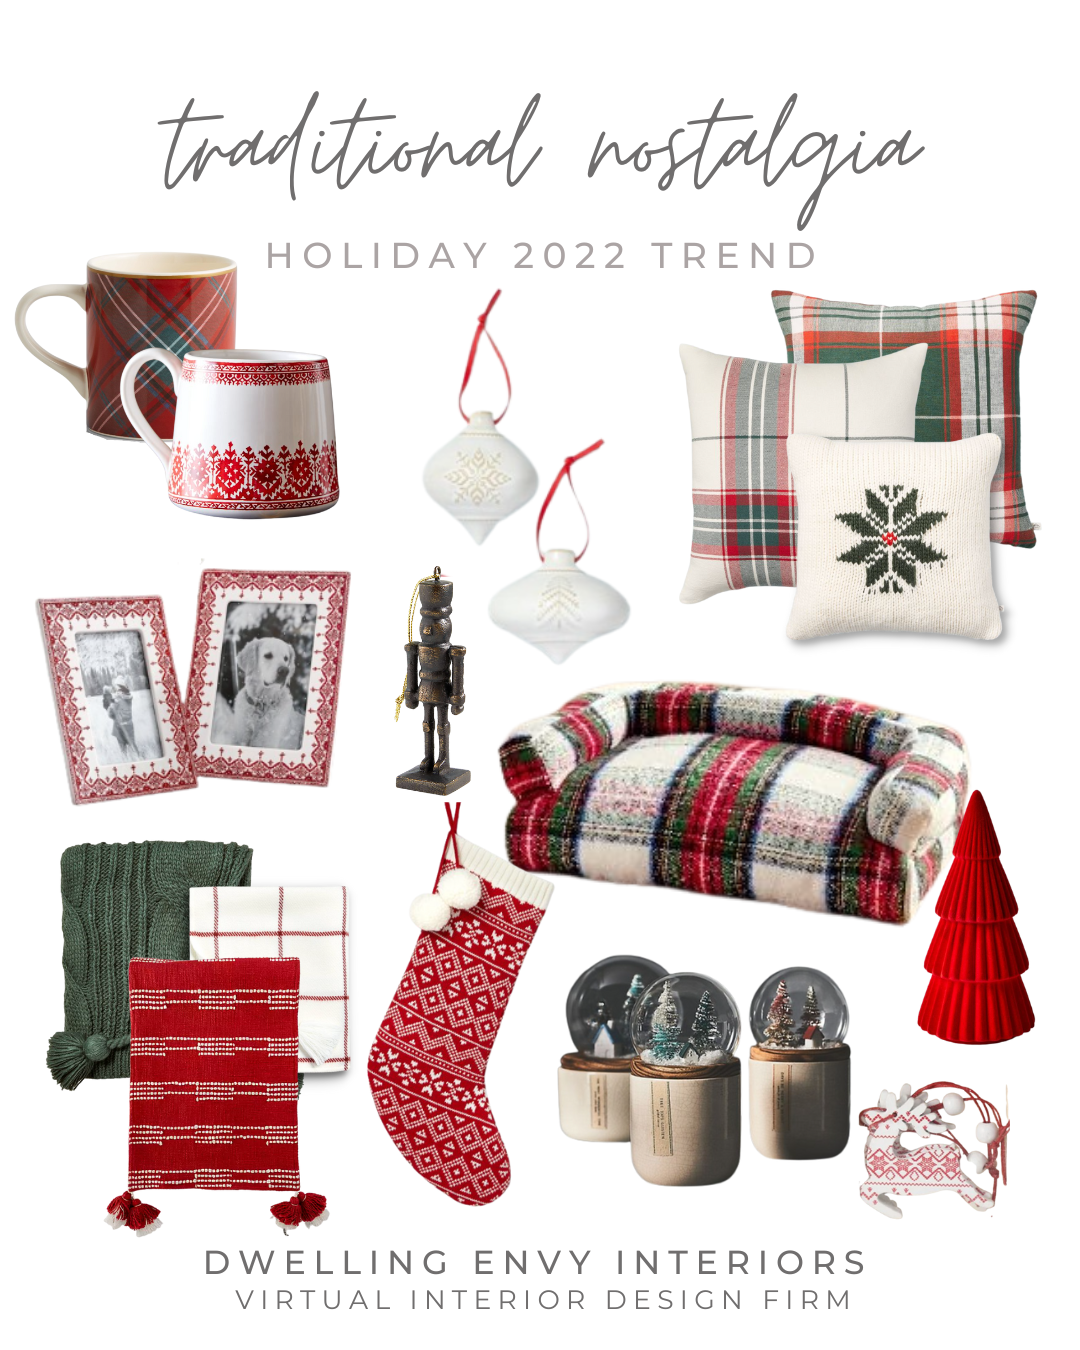 image of Christmas Home Decor items recommended by Dwelling Envy Interiors, coffee mugs, throw blankets, plaid pet bed, accent holiday christmas pillows, snow globes, white and red ornaments